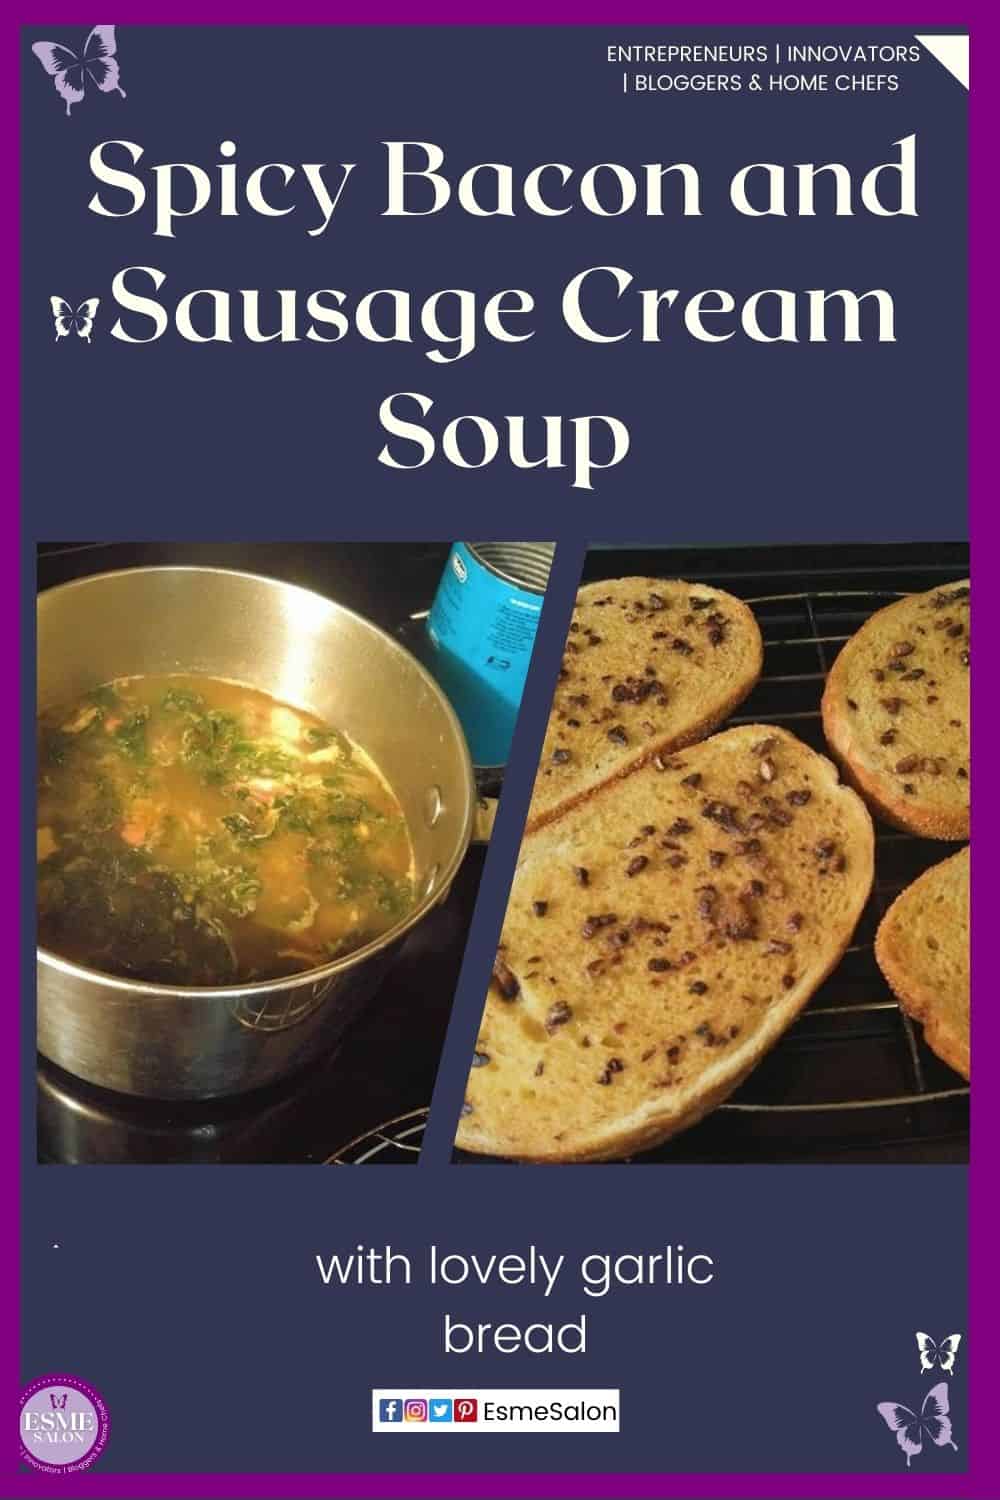 an image of a pot of Spicy Bacon and Sausage Cream Soup with garlic bread